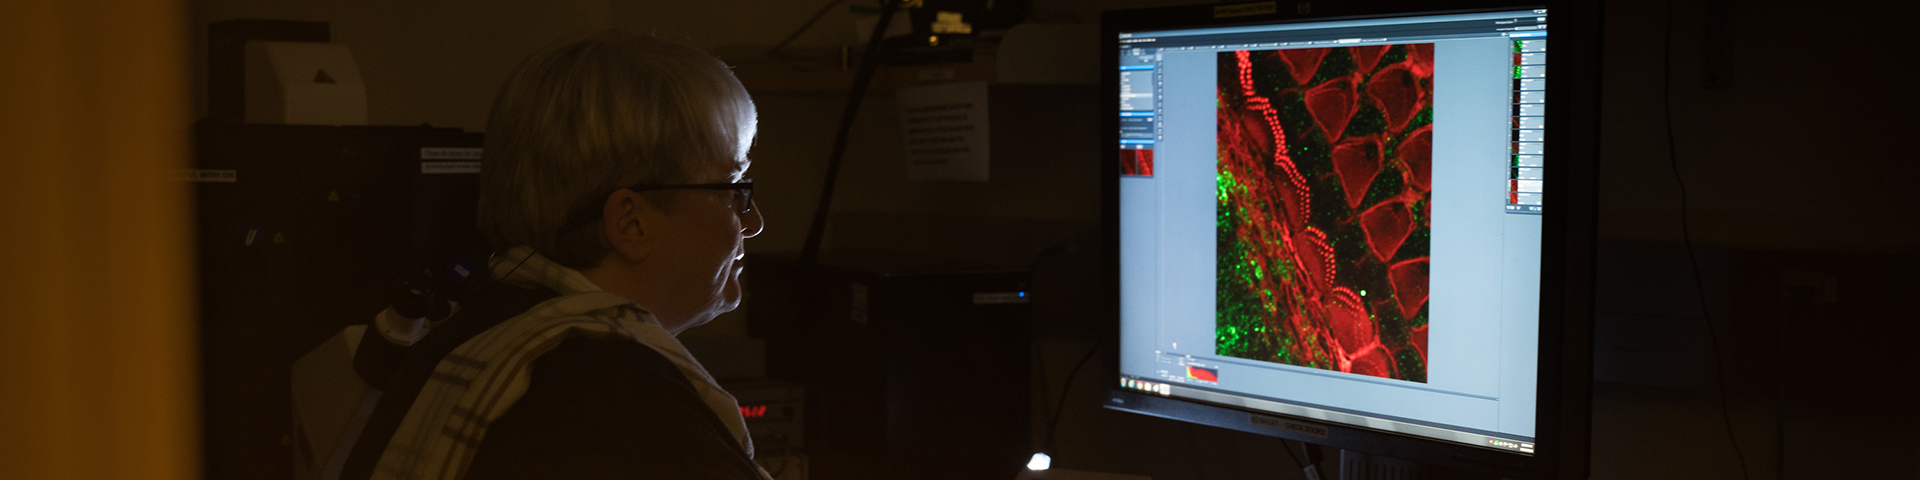 Stefanie Kaech Petrie, Ph.D., director of the Advanced Light Microscopy Core at the Jungers Center for Neuroscience Research looking at a magnified image of sensory cells for sound and balance in the inner ear.